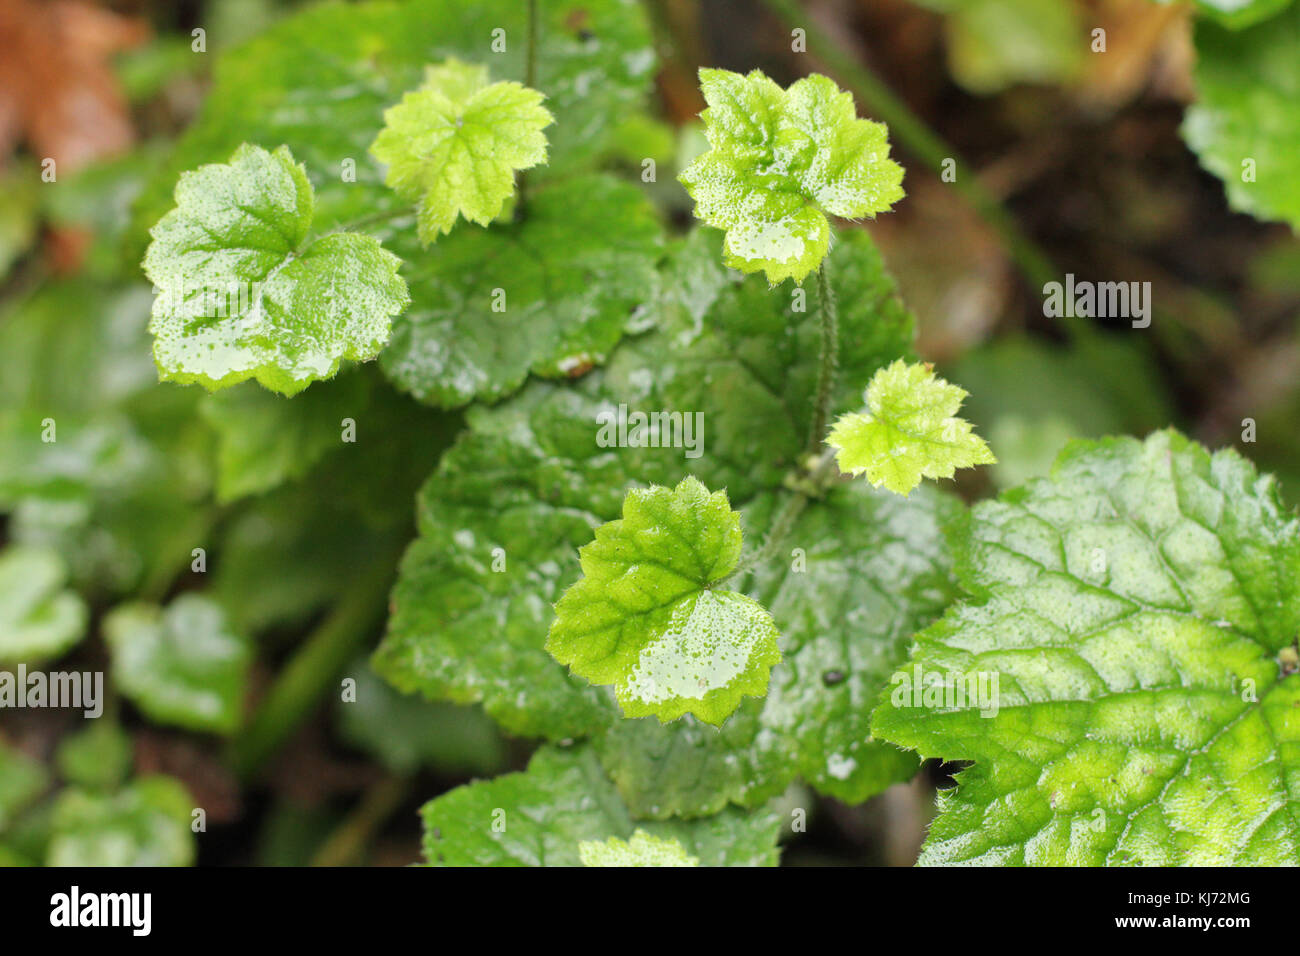 Wet picture of leaves of small ones over big ones Stock Photo